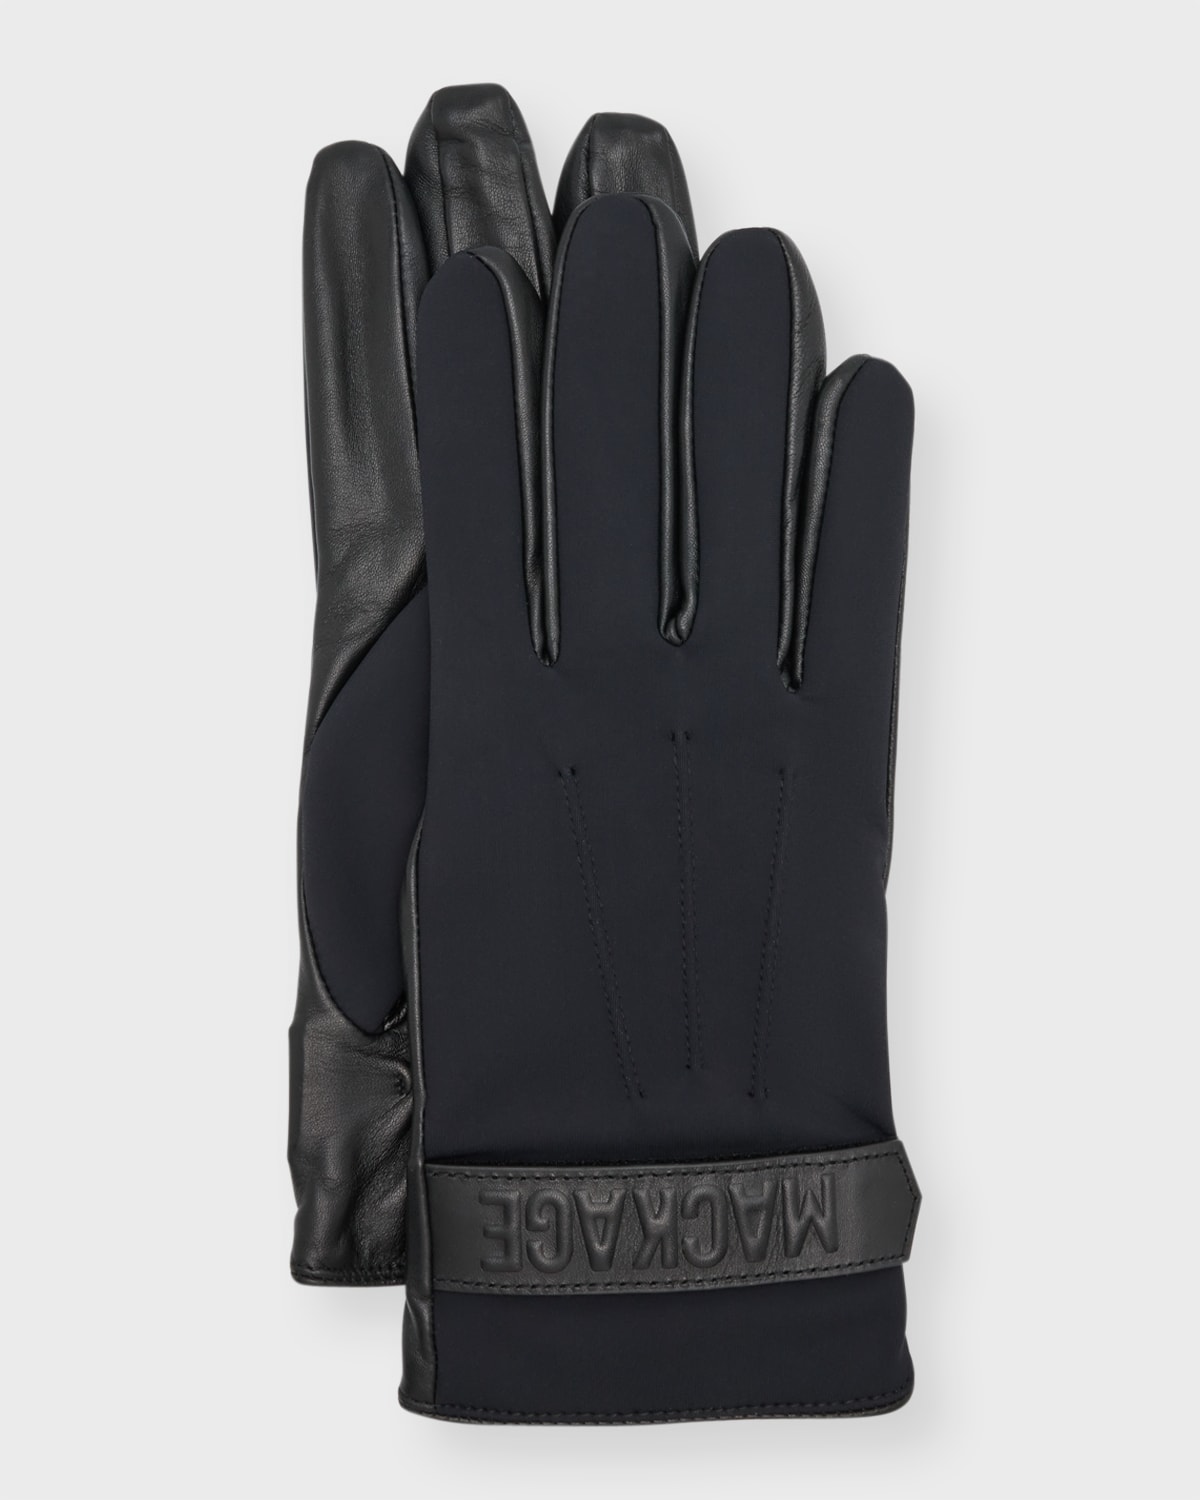 MACKAGE MEN'S LEATHER AND FLEECE DRIVING GLOVES